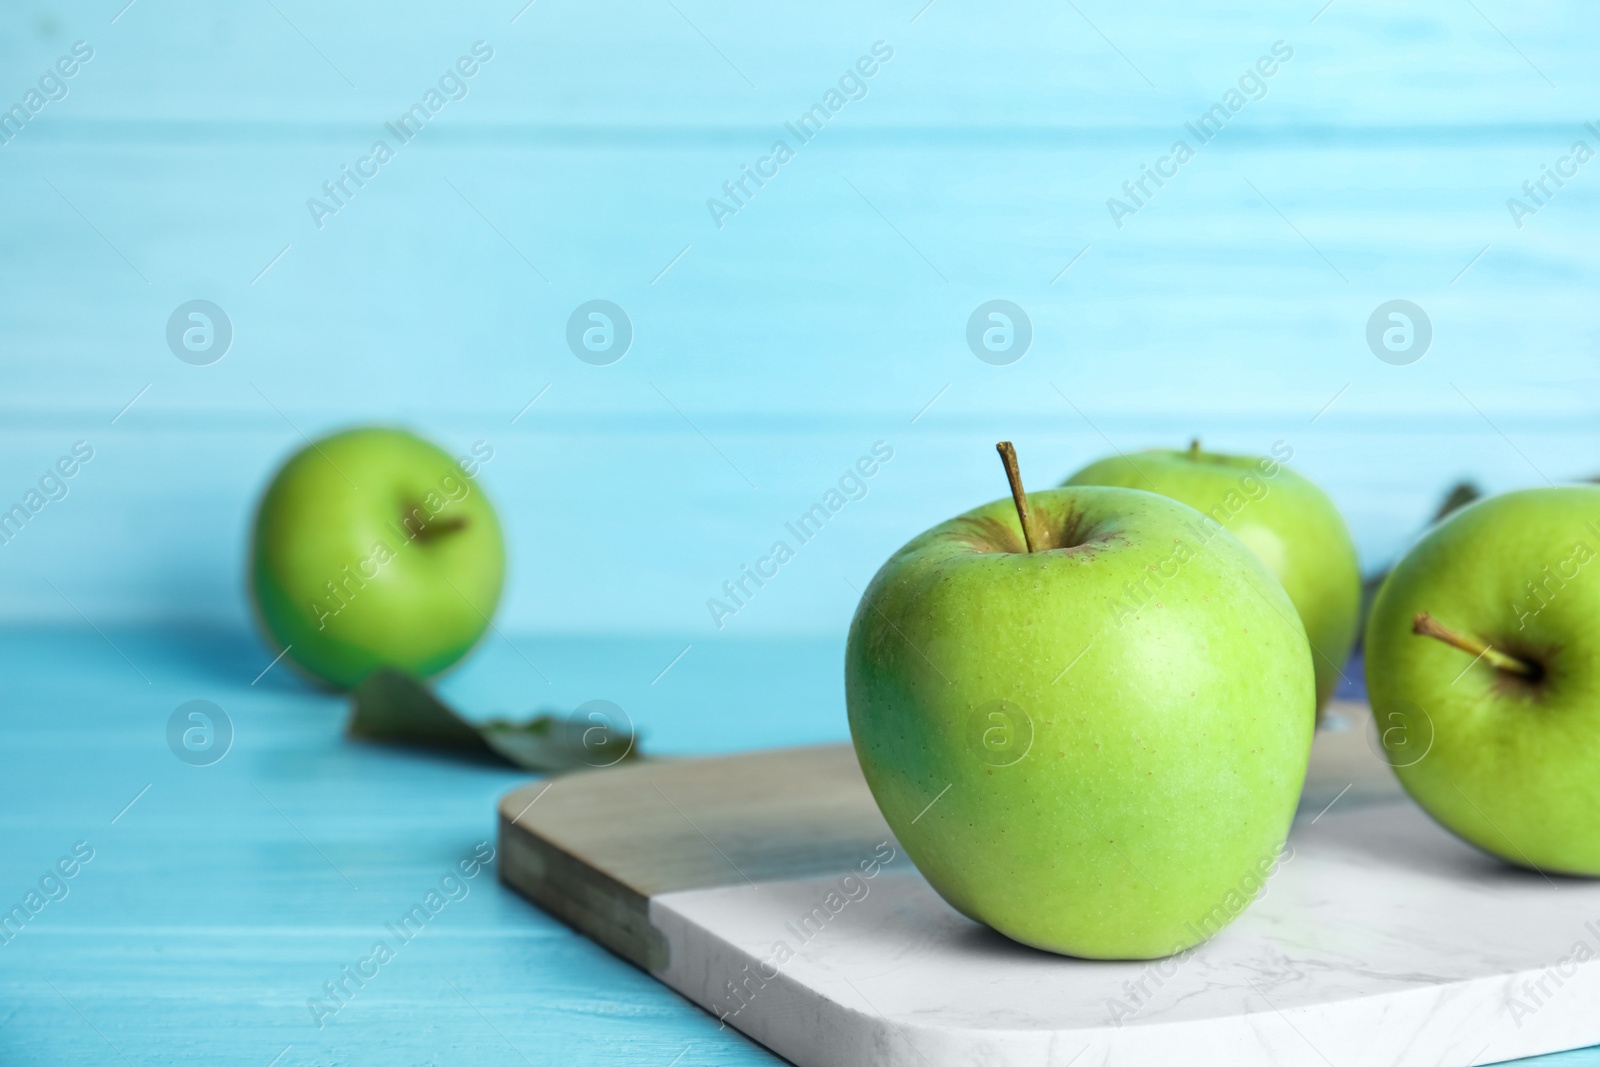 Photo of Ripe green apples on light blue wooden table. Space for text